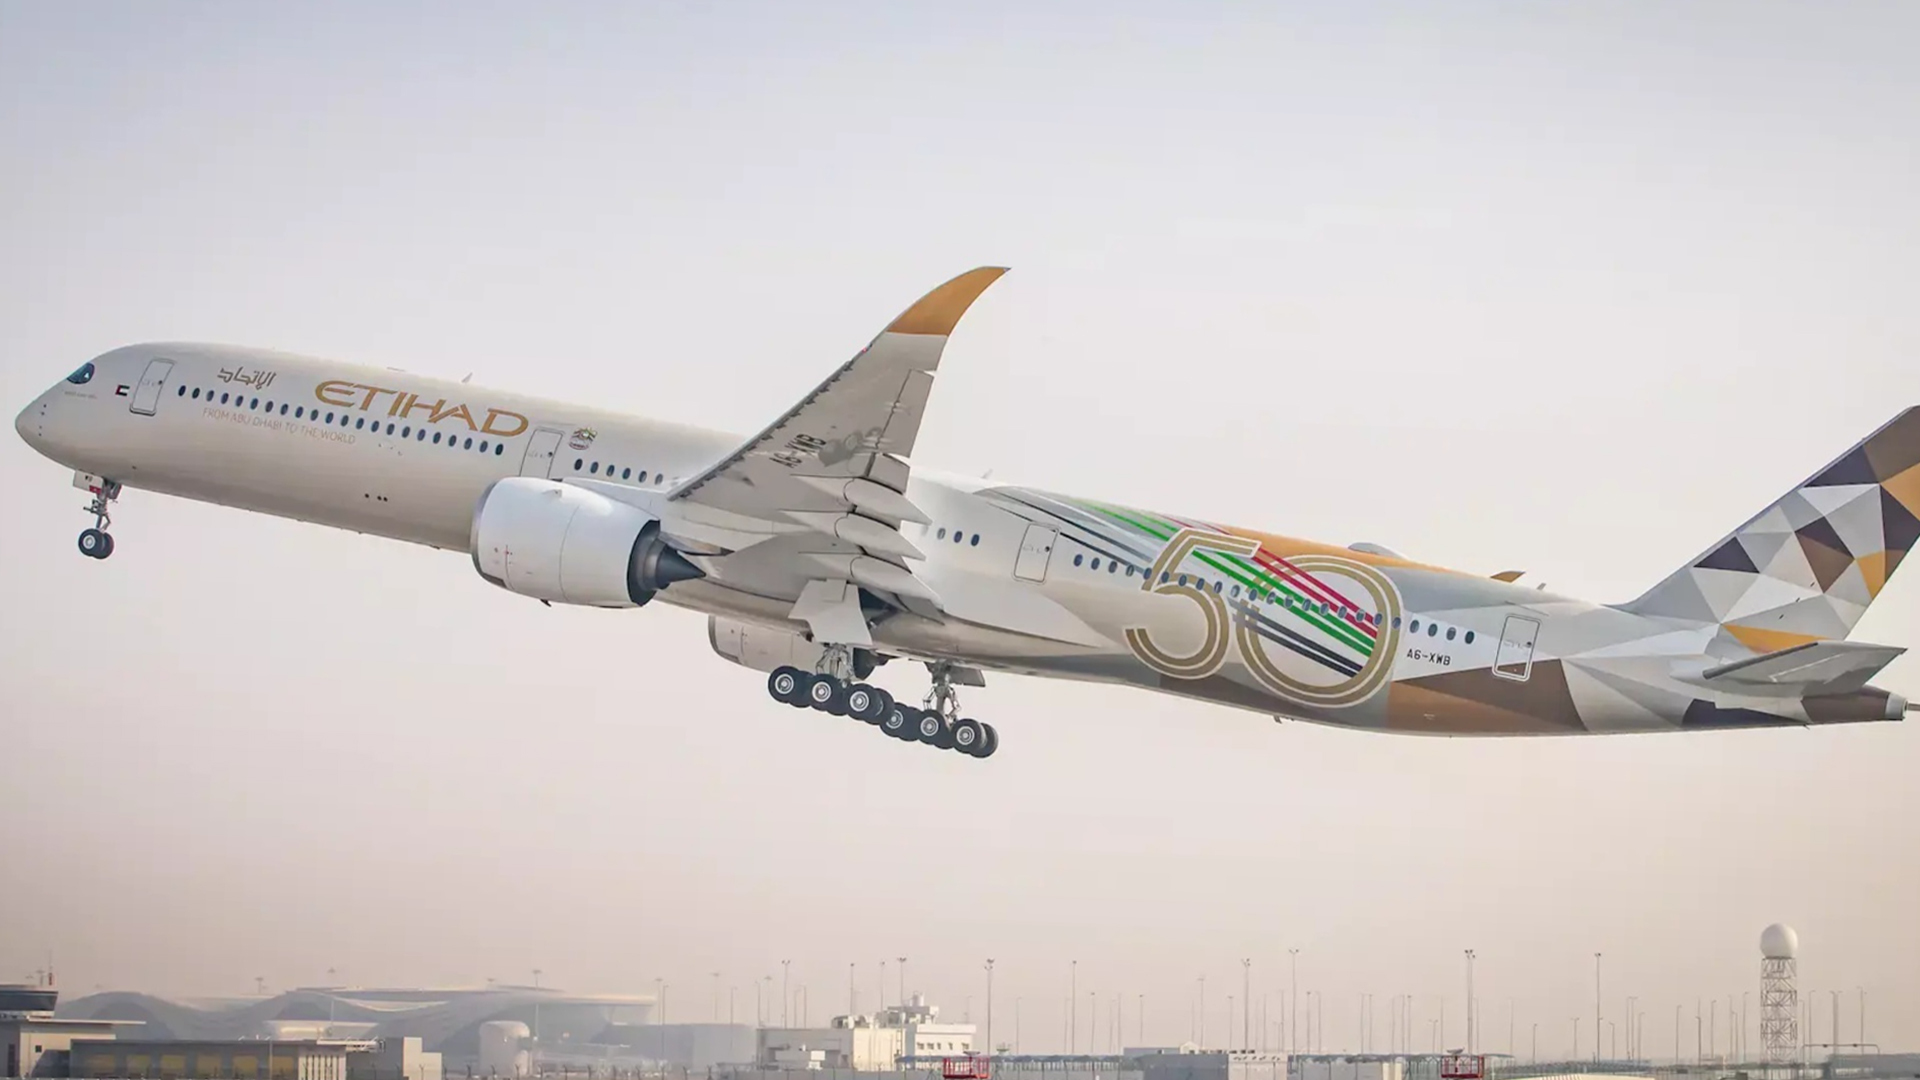 A colorful Etihad Airways jetliner takes off from Abu Dhabi airport.